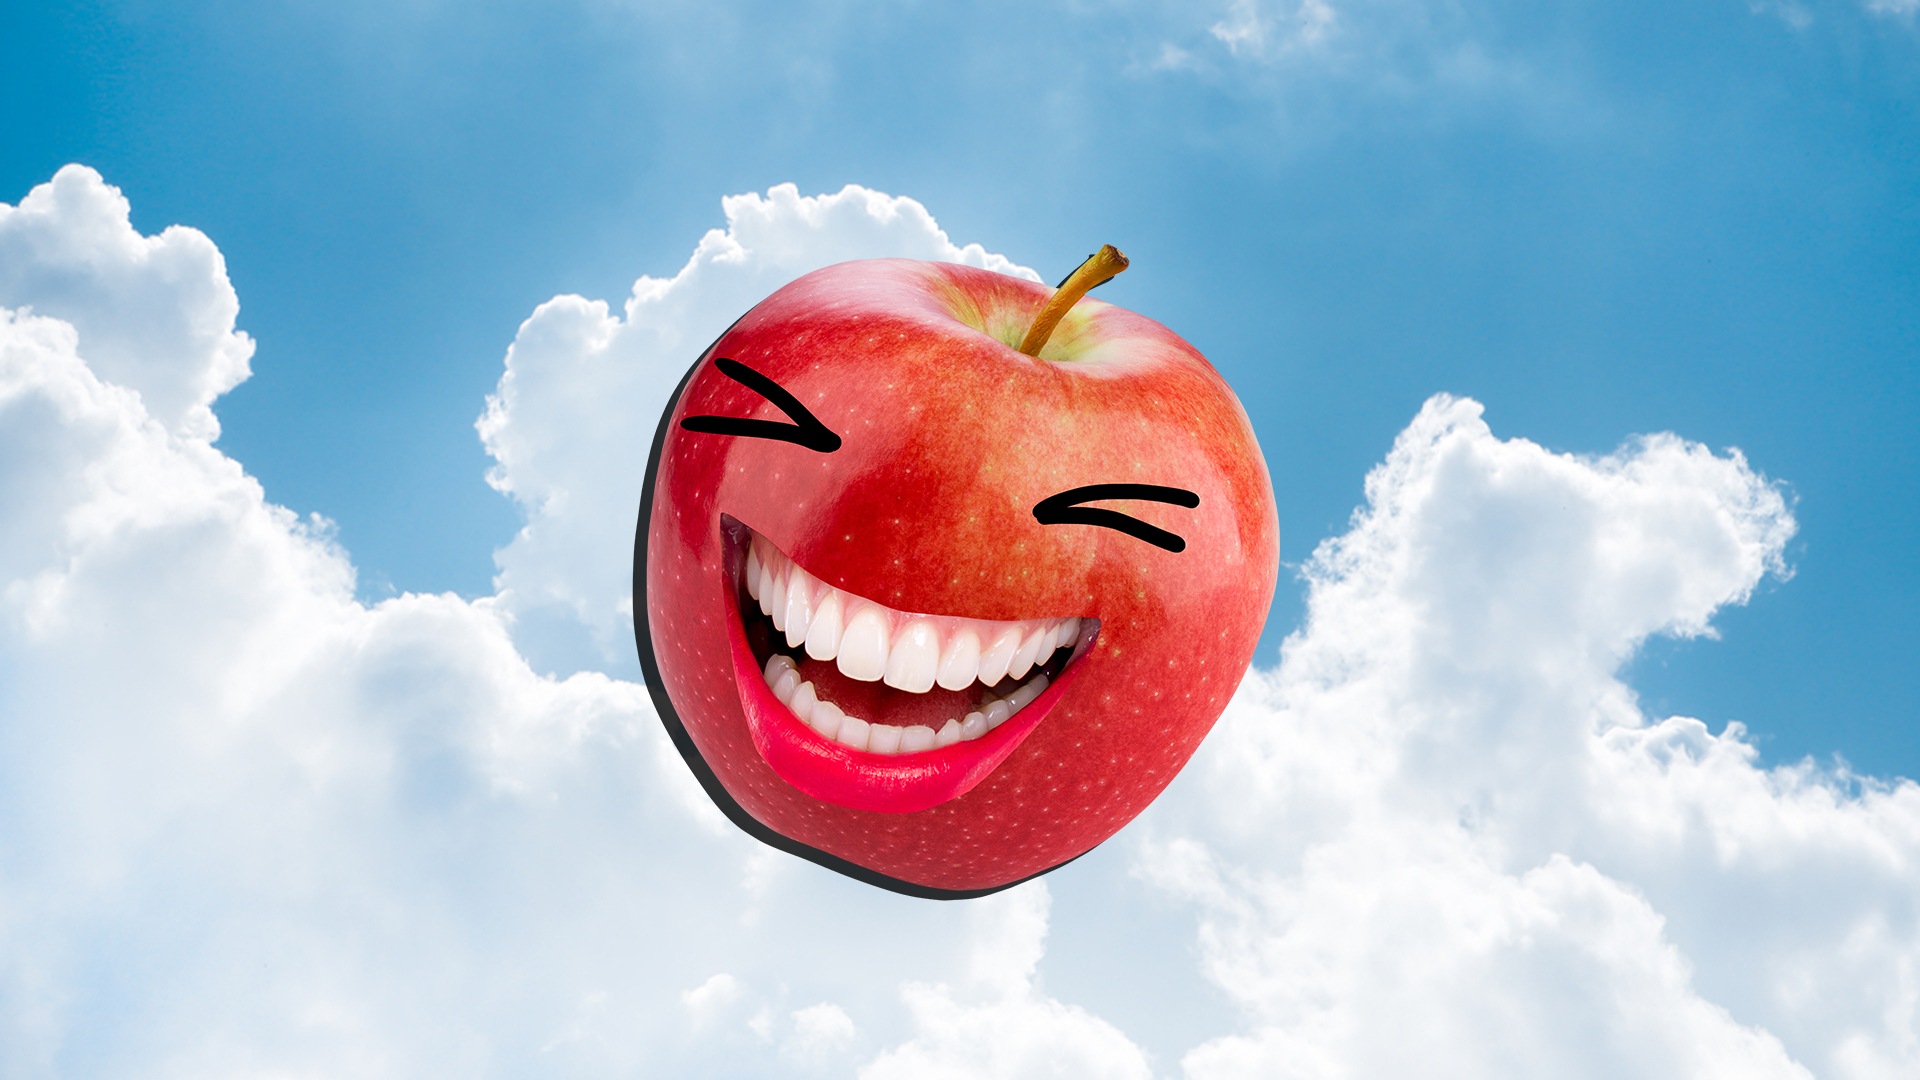 A laughing red apple in front of a cloudy and blue sky background